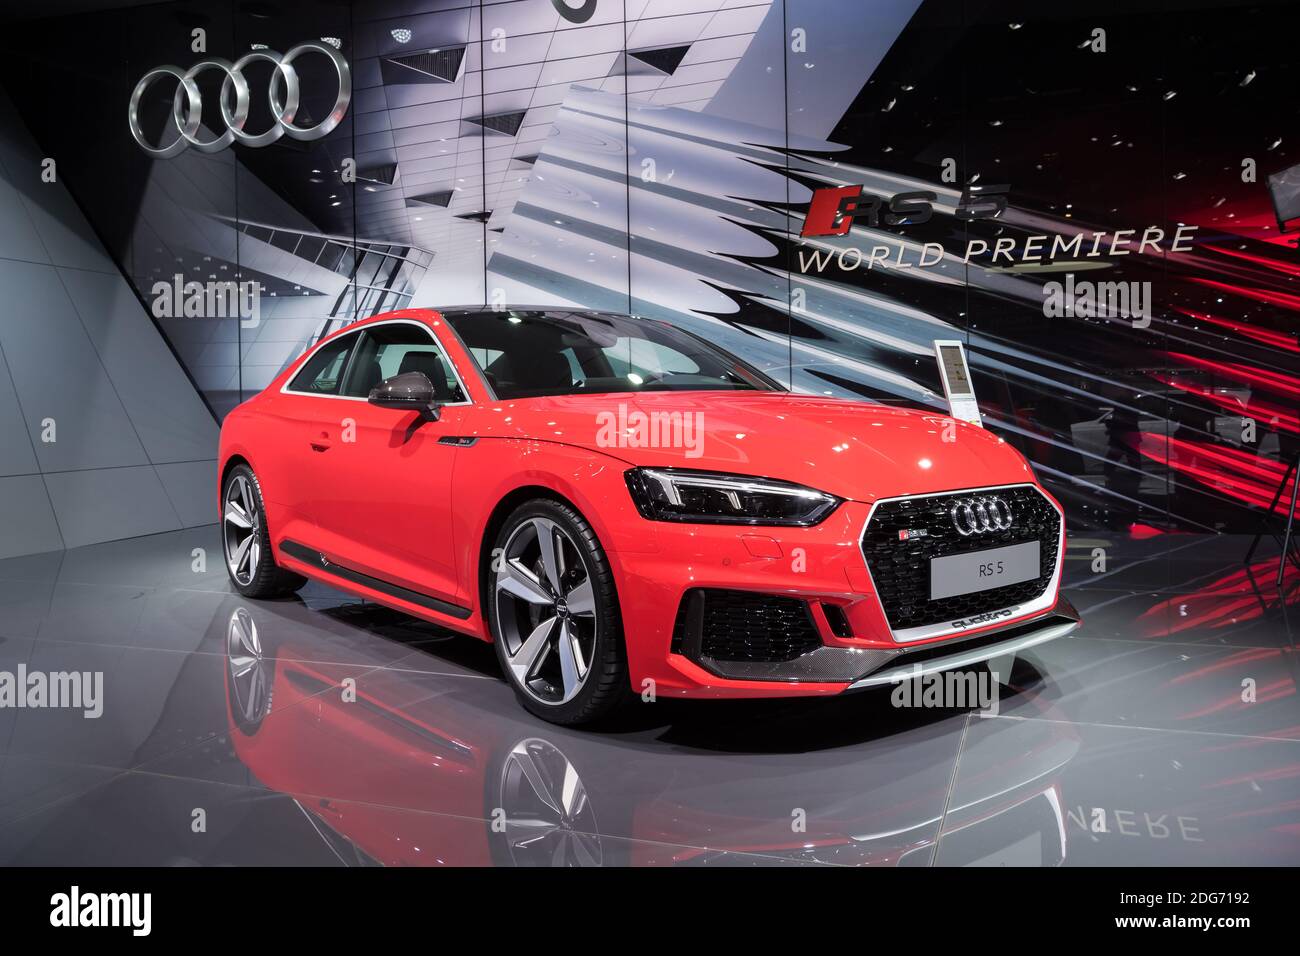 Audi RS5 is on display during the 87th Geneva International Motor Show at Palexpo Exhibition Centre in Geneva, Switzerland on March 08, 2017. The show opens to the public on March 9 to 19. Photo by Loona/ABACAPRESS.COM Stock Photo